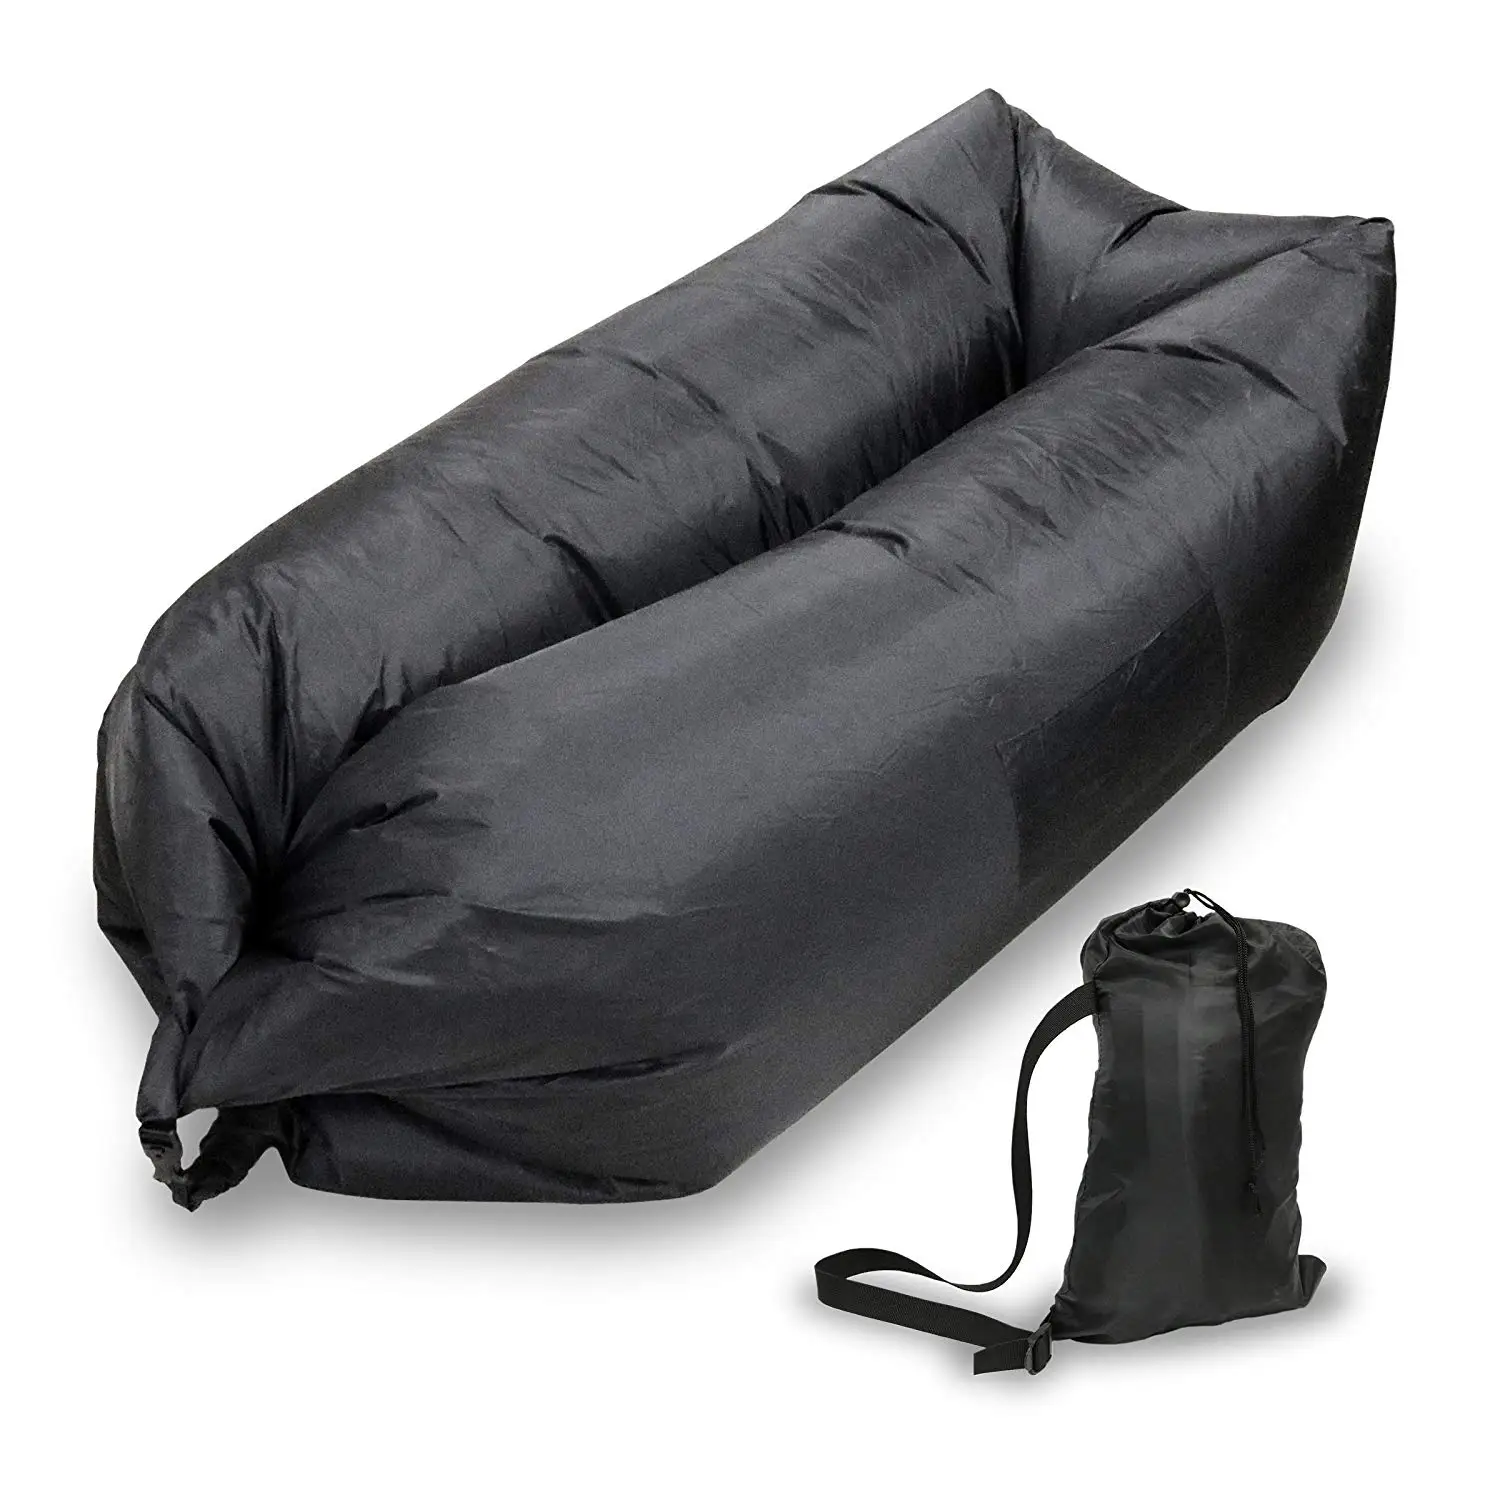 Pouchcouch Lightweight Carrying Pouch/Inflatable Couch